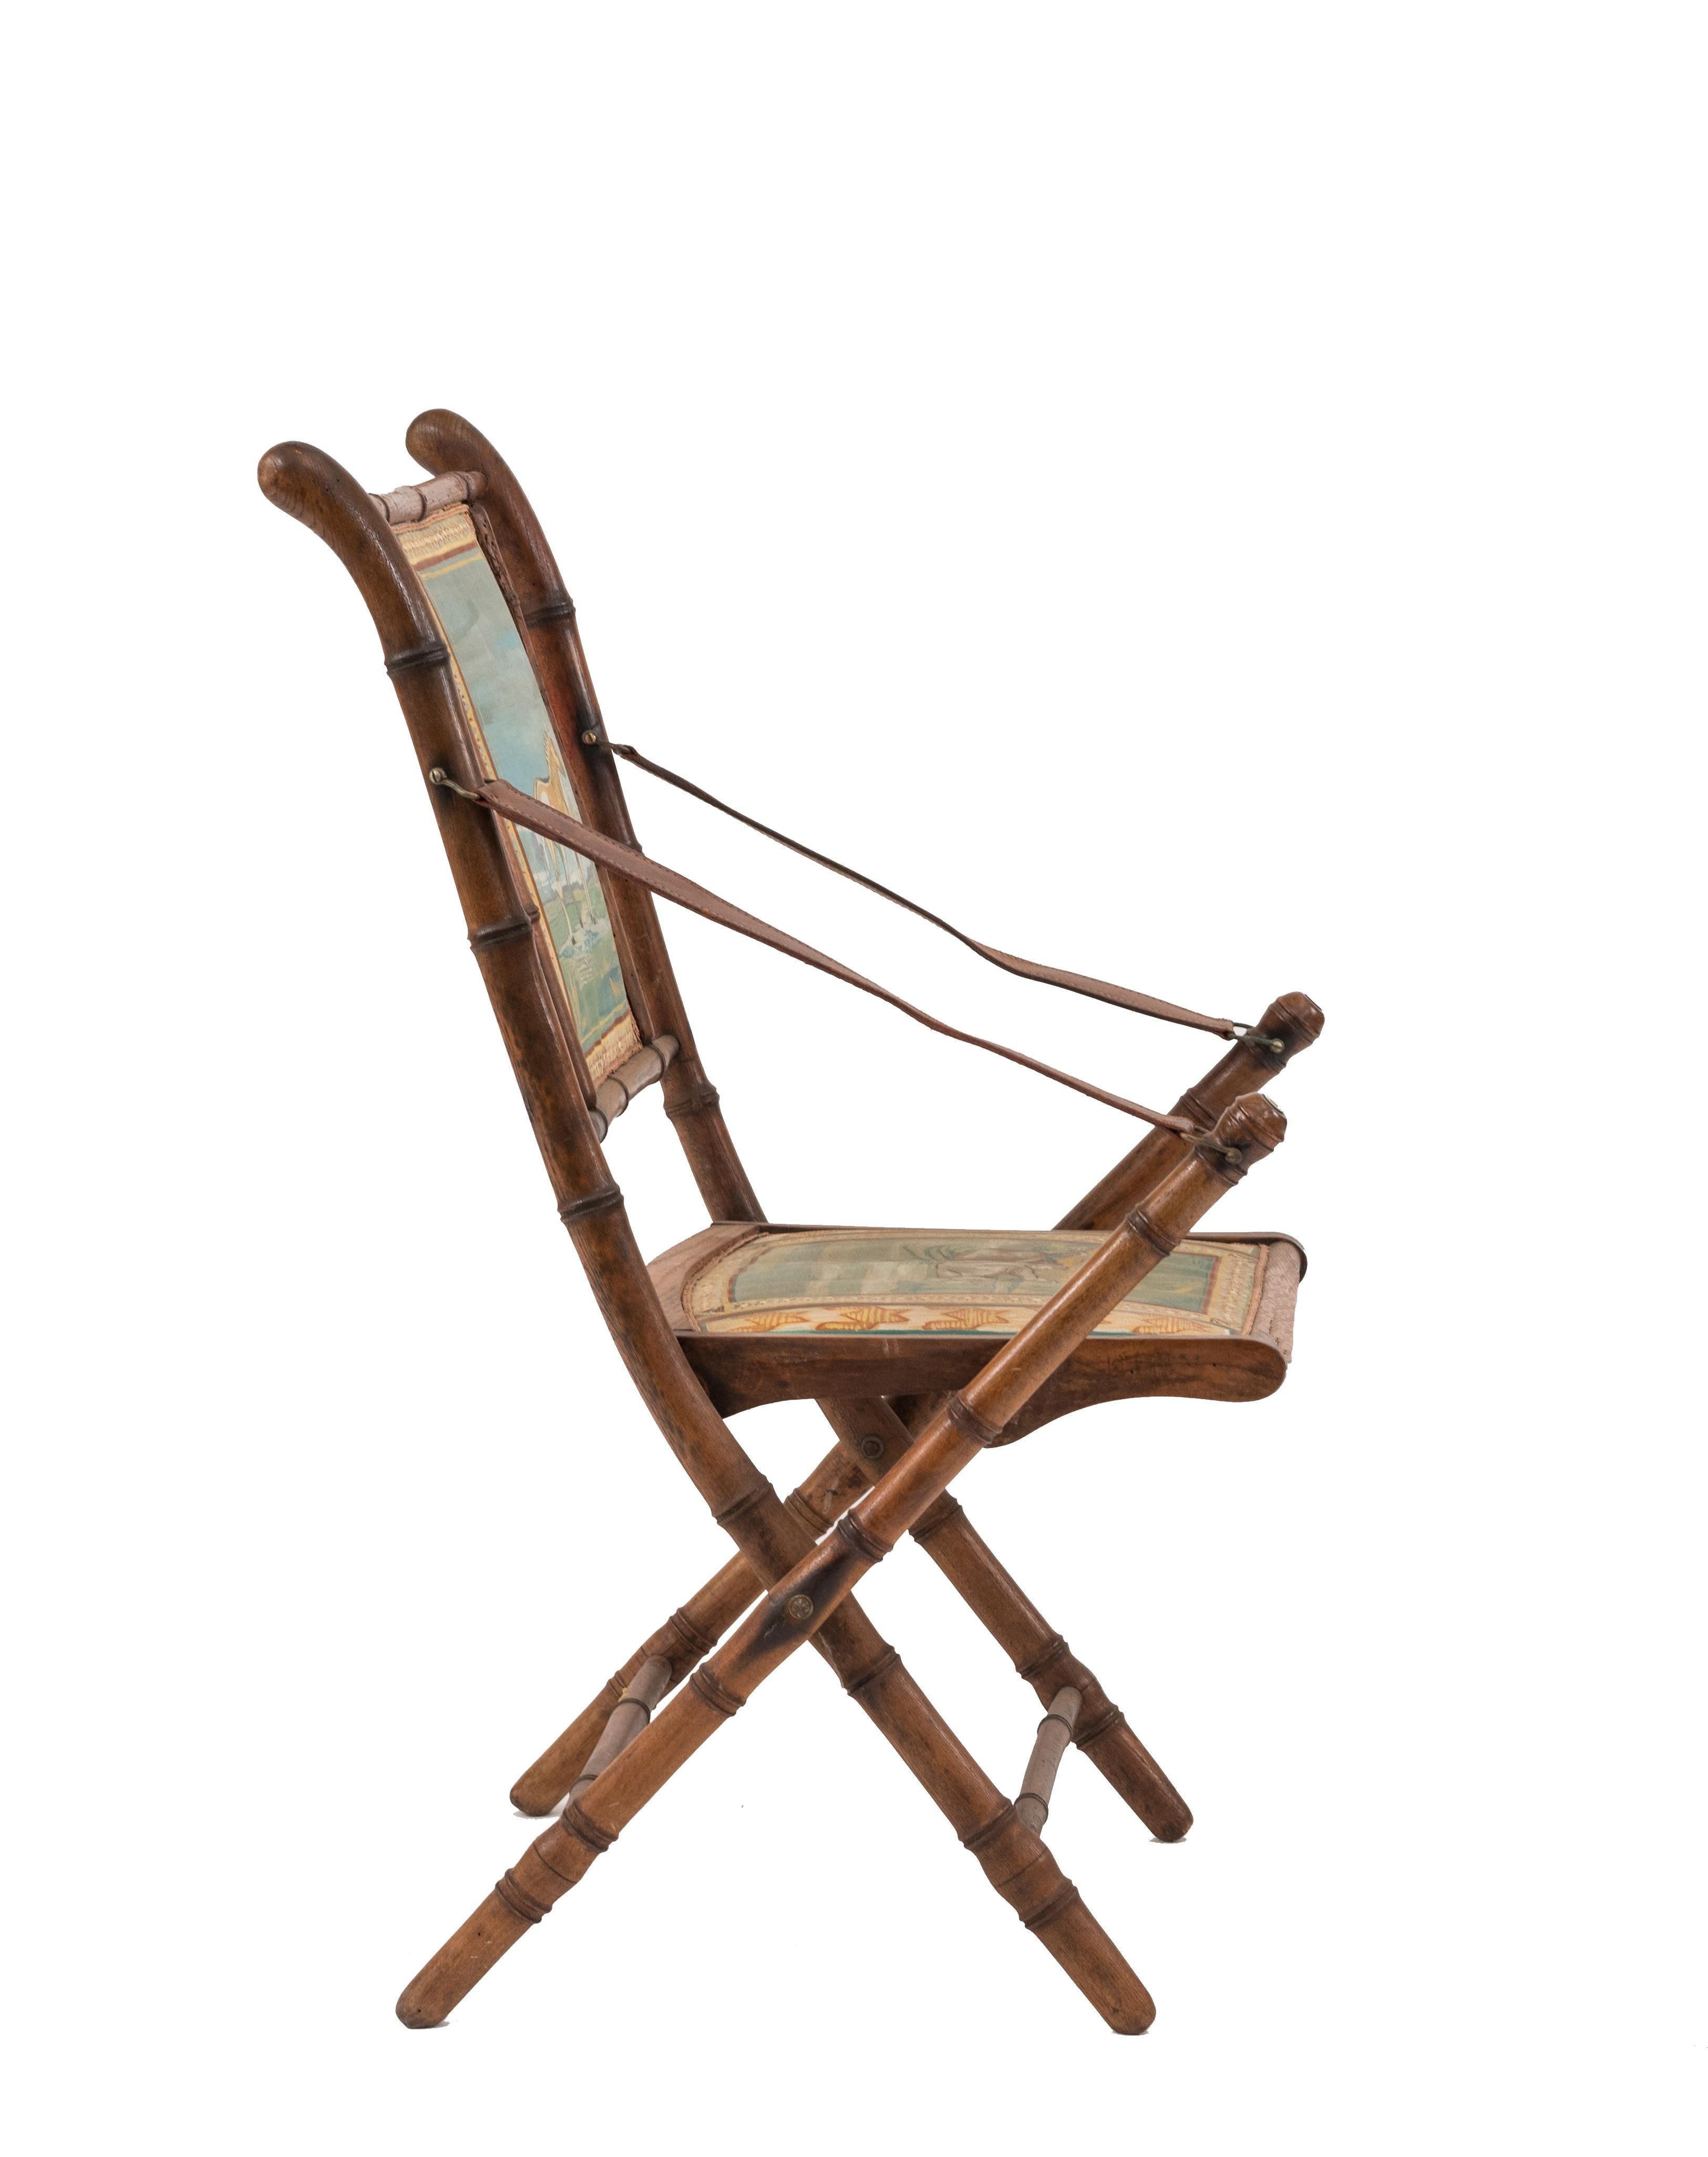 French Victorian oak faux bamboo Campaign design folding armchairhaving modern painted seat and back panels with animals and leather arm straps.